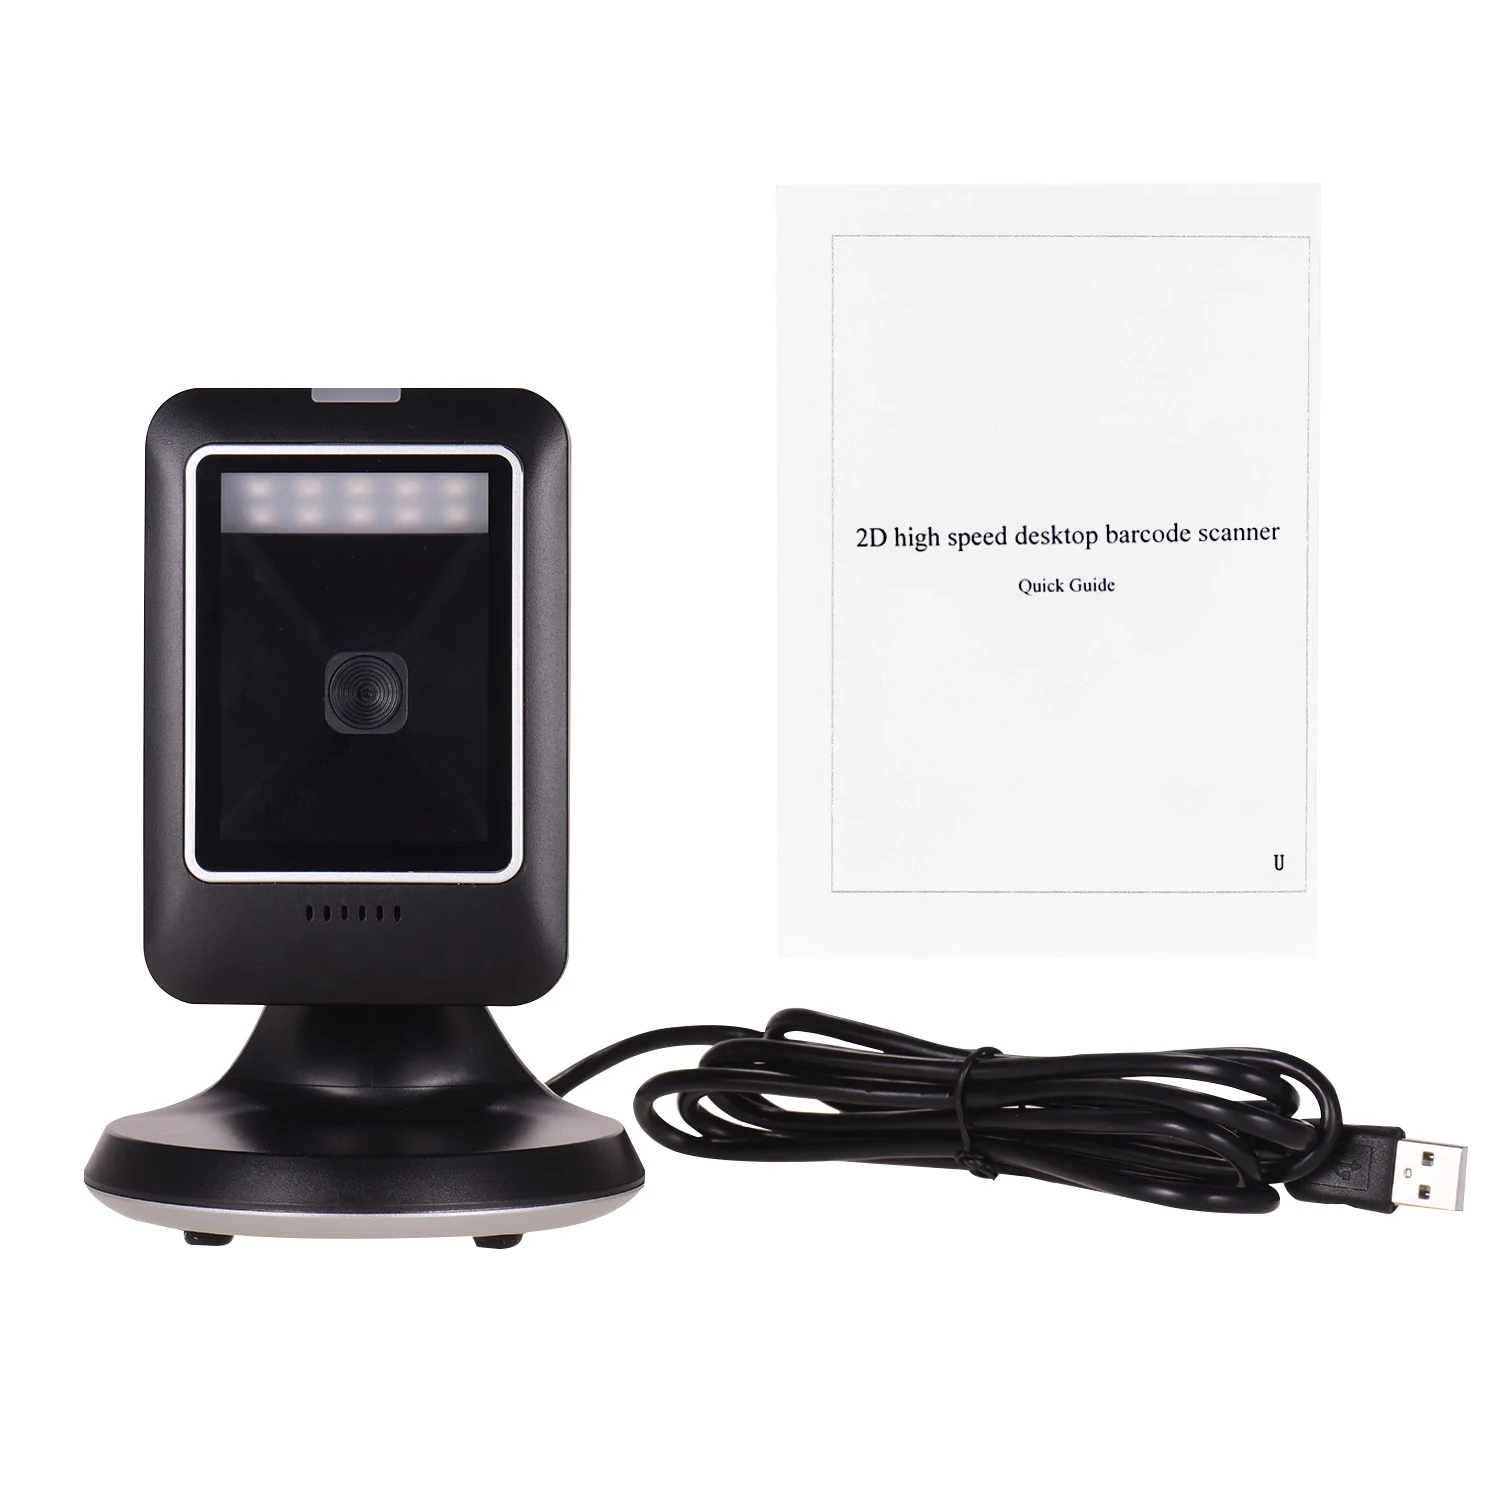 
MP6300 2D Scanner omni scanner Barcode reader with USB RS232 Interface ultra high performance for POS 